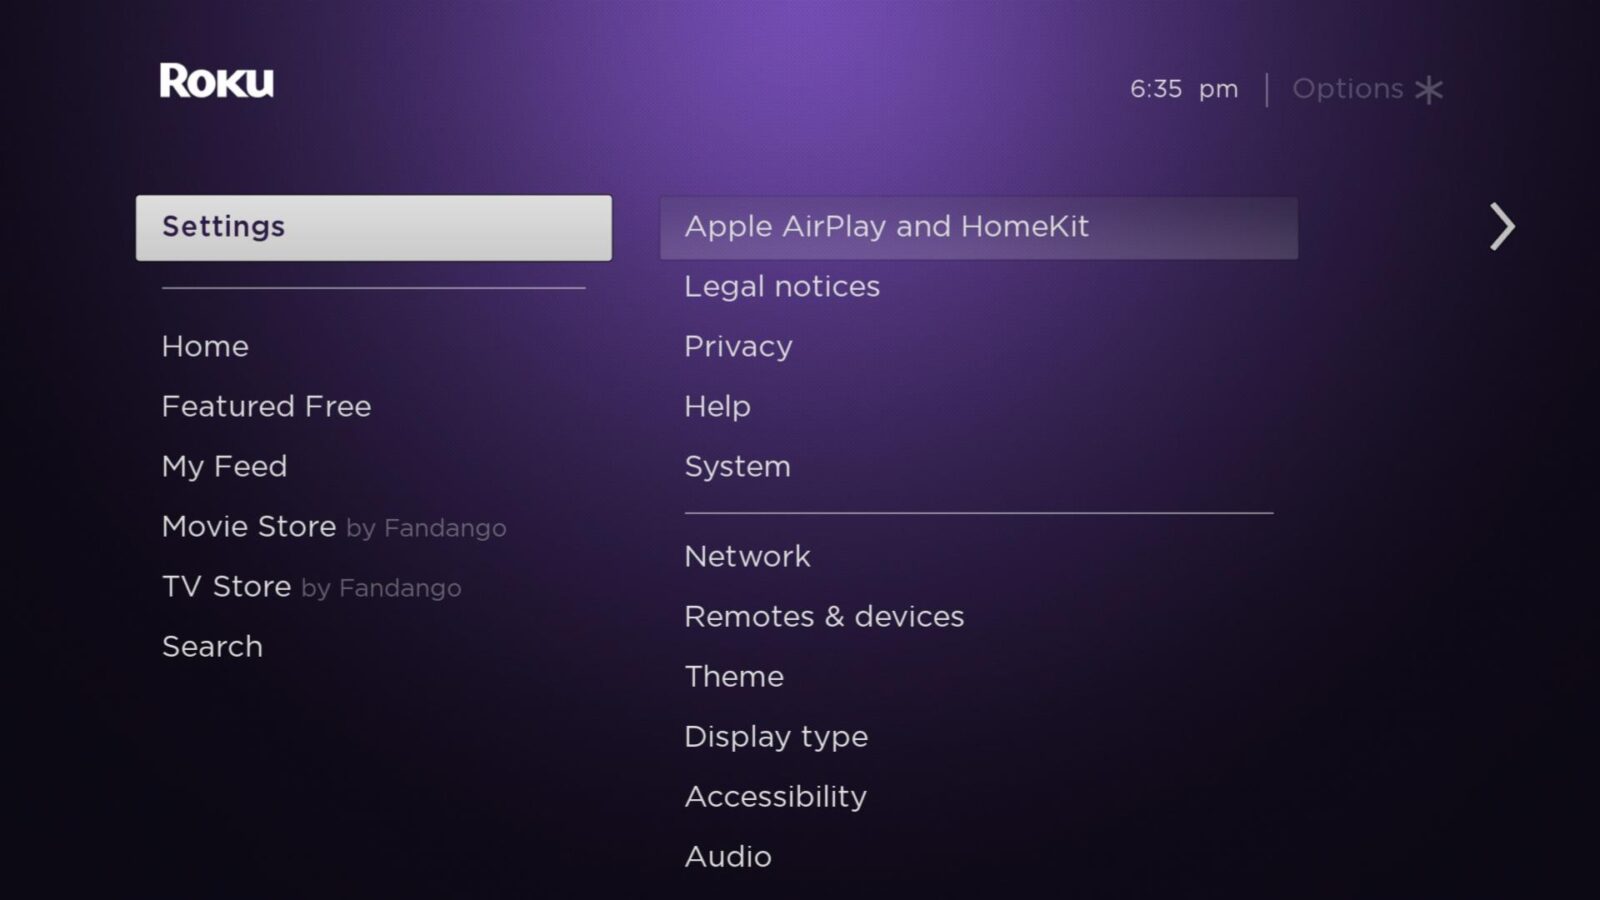 How To Mirror Your Iphone Roku, Can I Screen Mirror My Iphone To Roku Tv Without Wifi